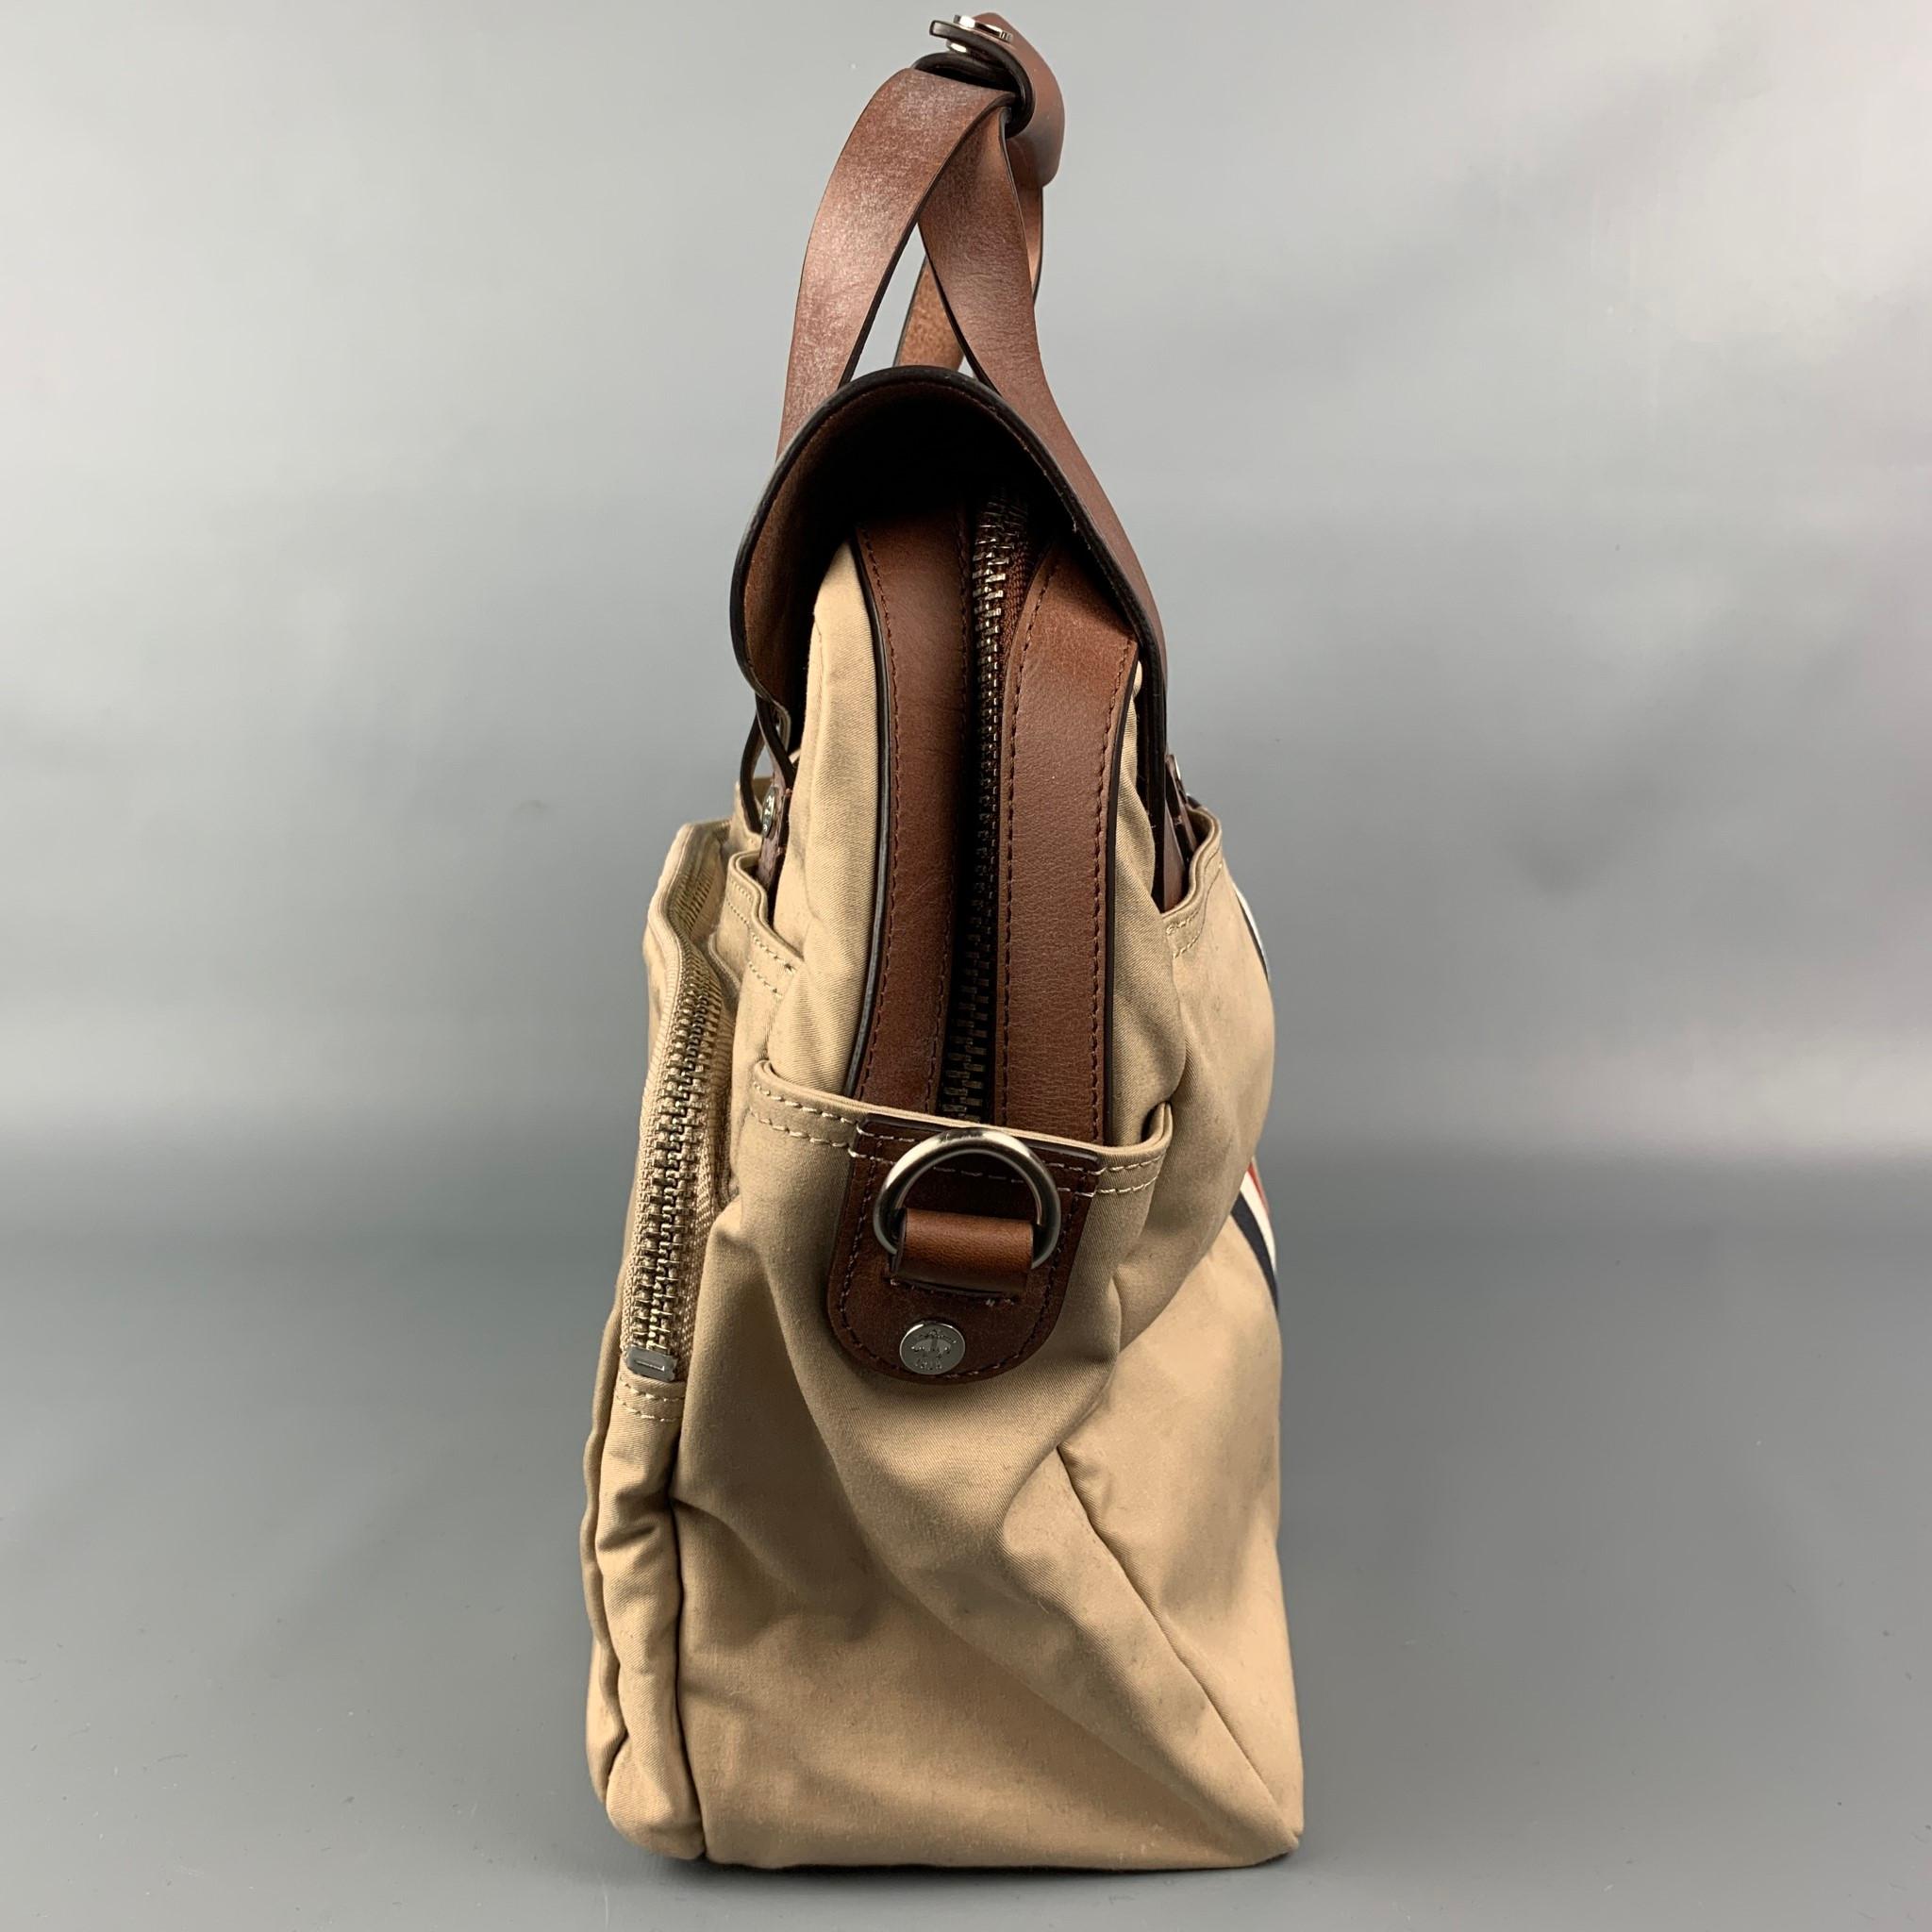 THOM BROWNE for BLACK FLEECE bag comes in a beige canvas with a tan leather trim featuring a messenger style, top handle, signature stripe detail, side pockets, silver tone hardware, zipper pocket, adjustable shoulder strap, snap button detail, and